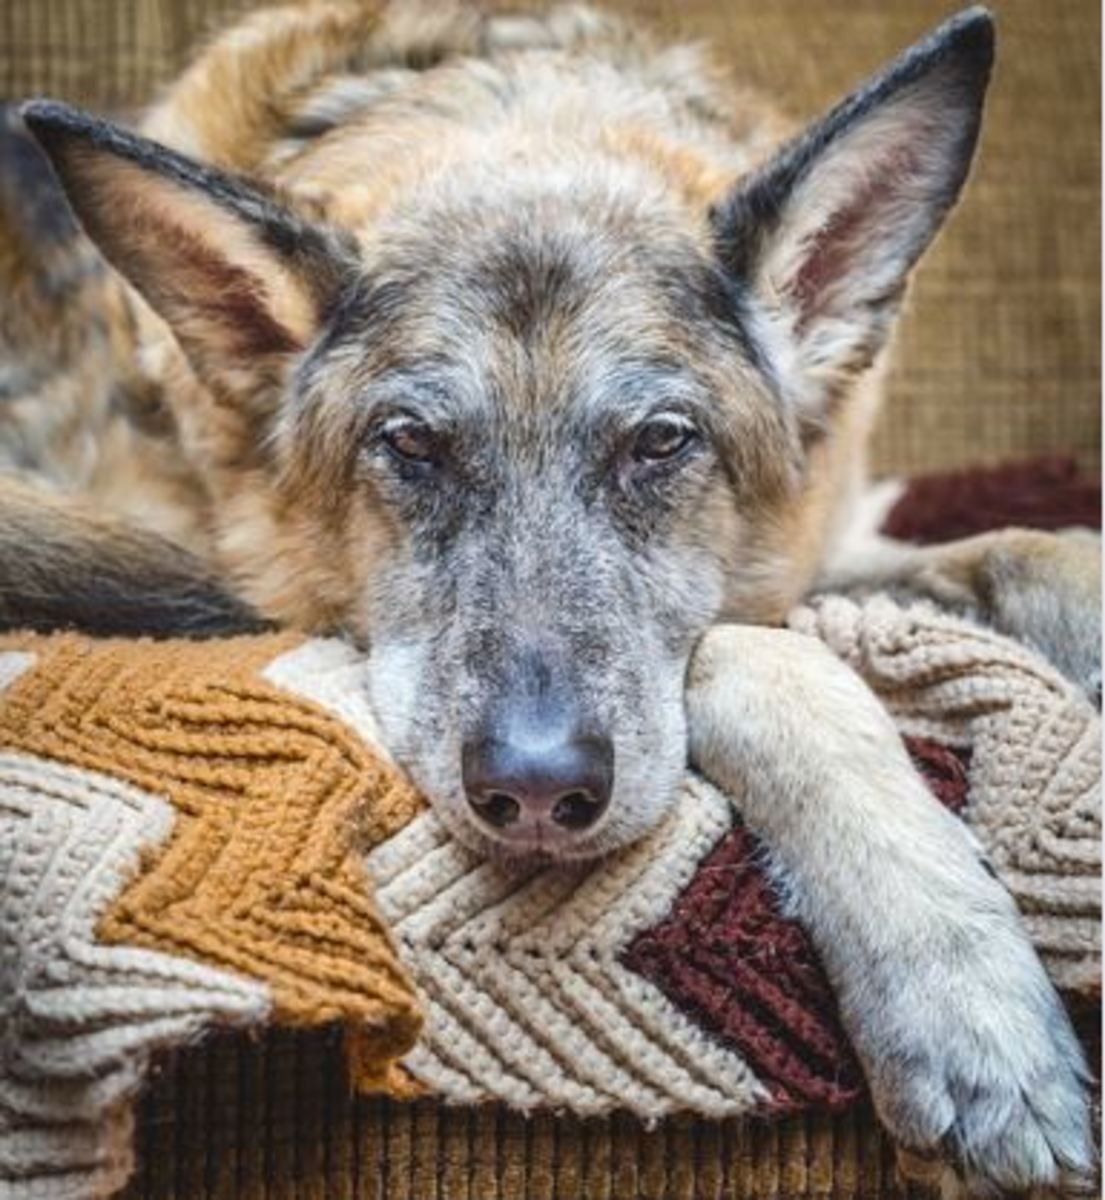 End Stages Of Kidney Disease In Dogs - Dog Discoveries